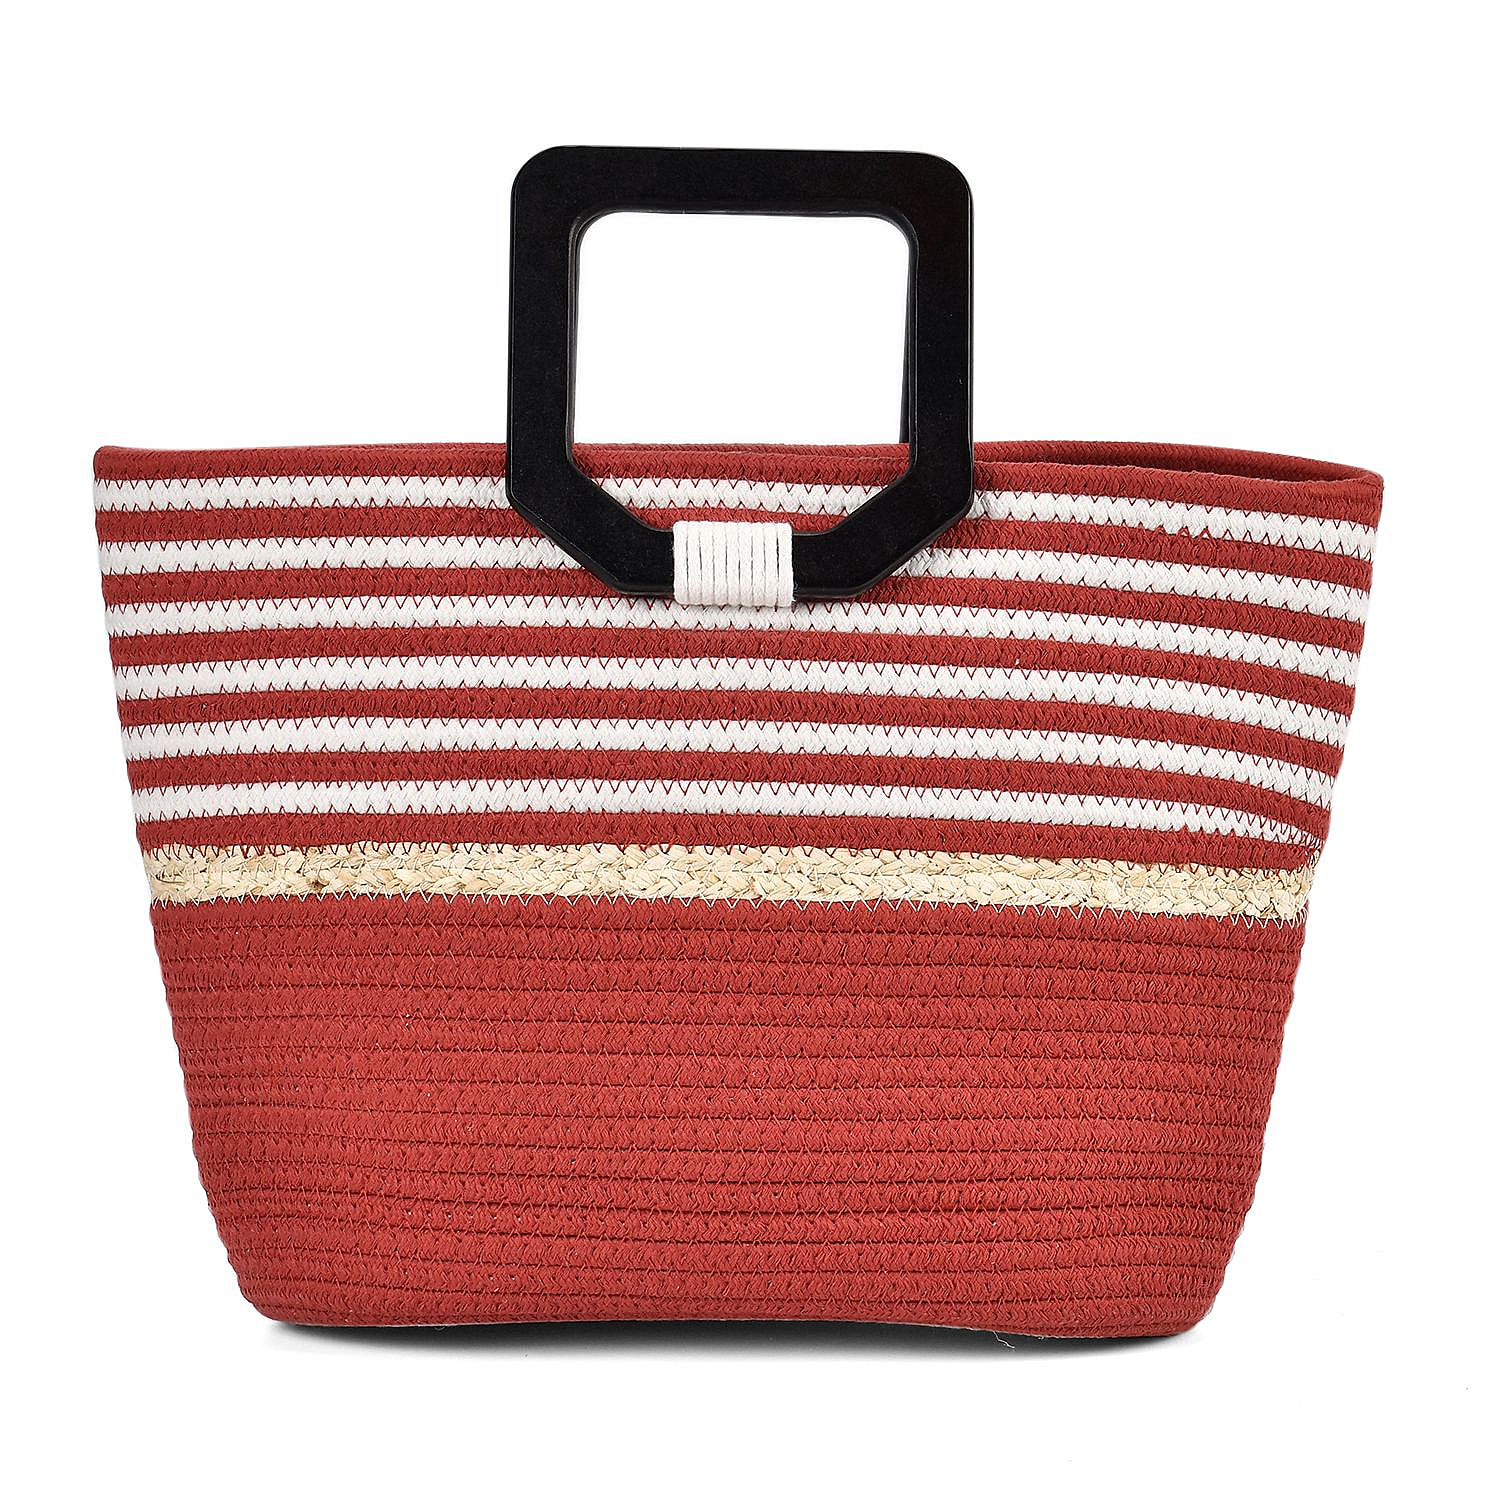 Cotton Knitted Patterned Tote Bag - Red